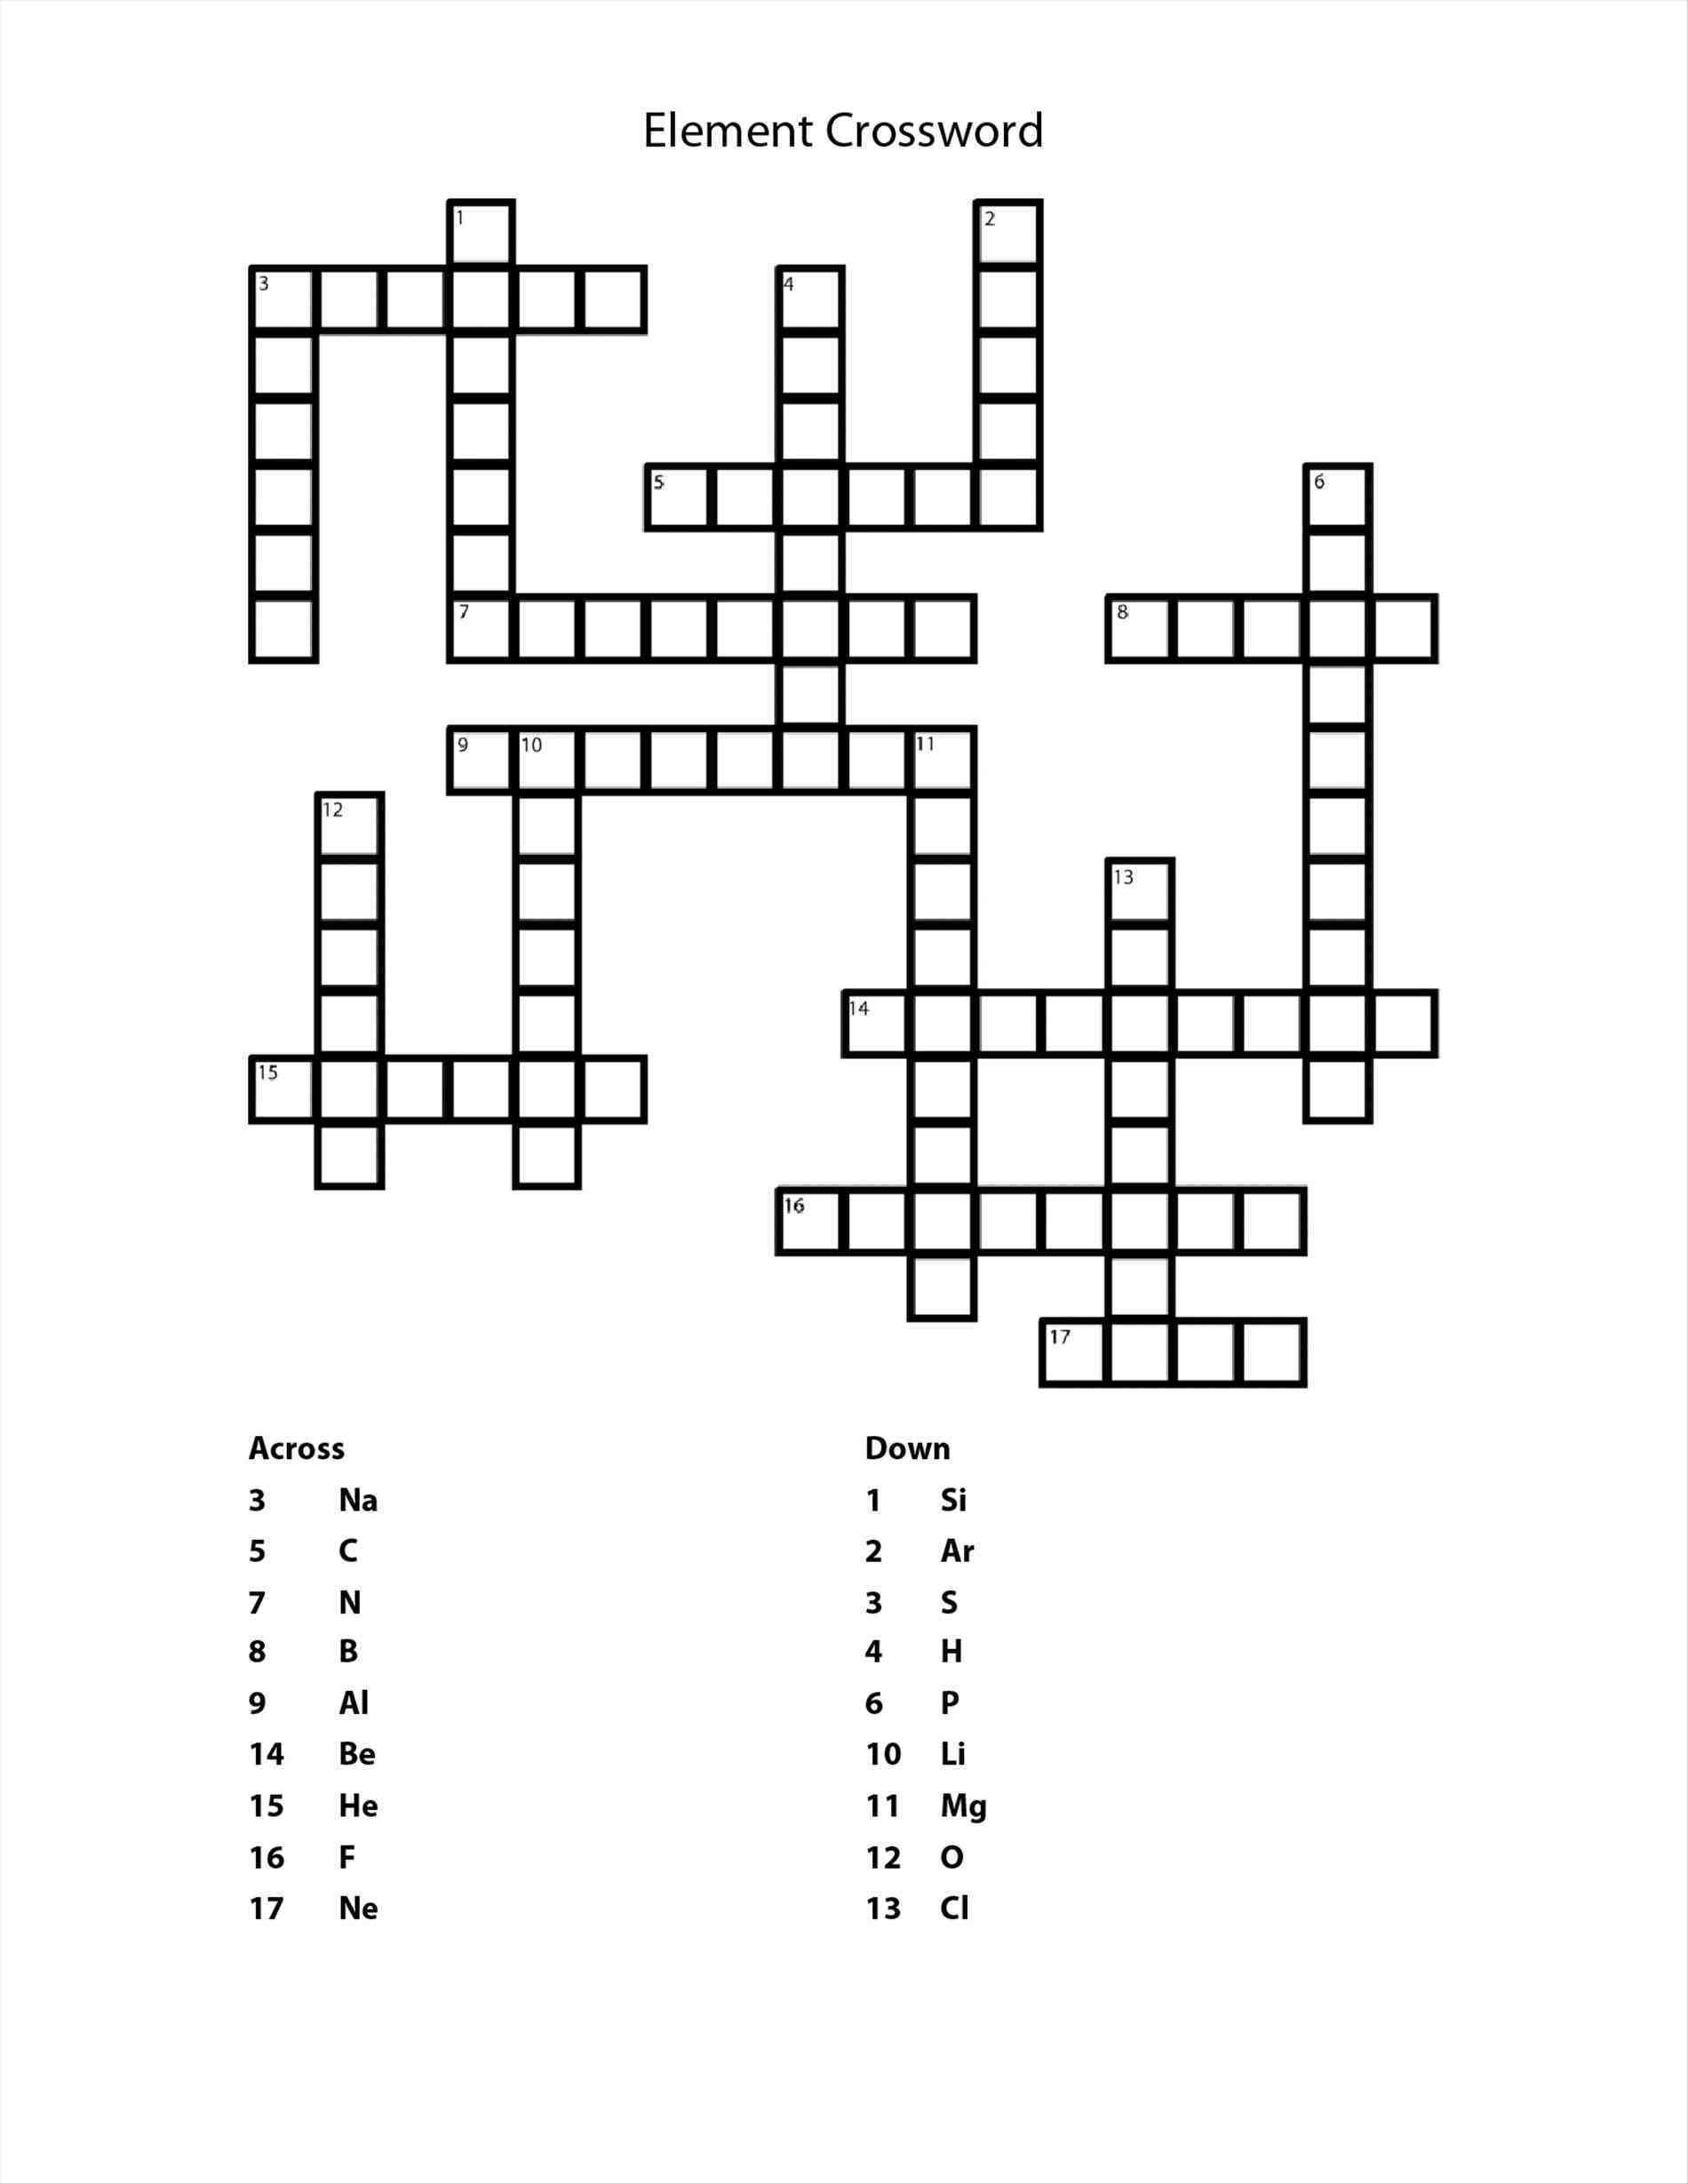 Crossword Puzzle Maker Printable And Free Printable Crossword Puzzles - Easy Printable Crossword Puzzle Maker